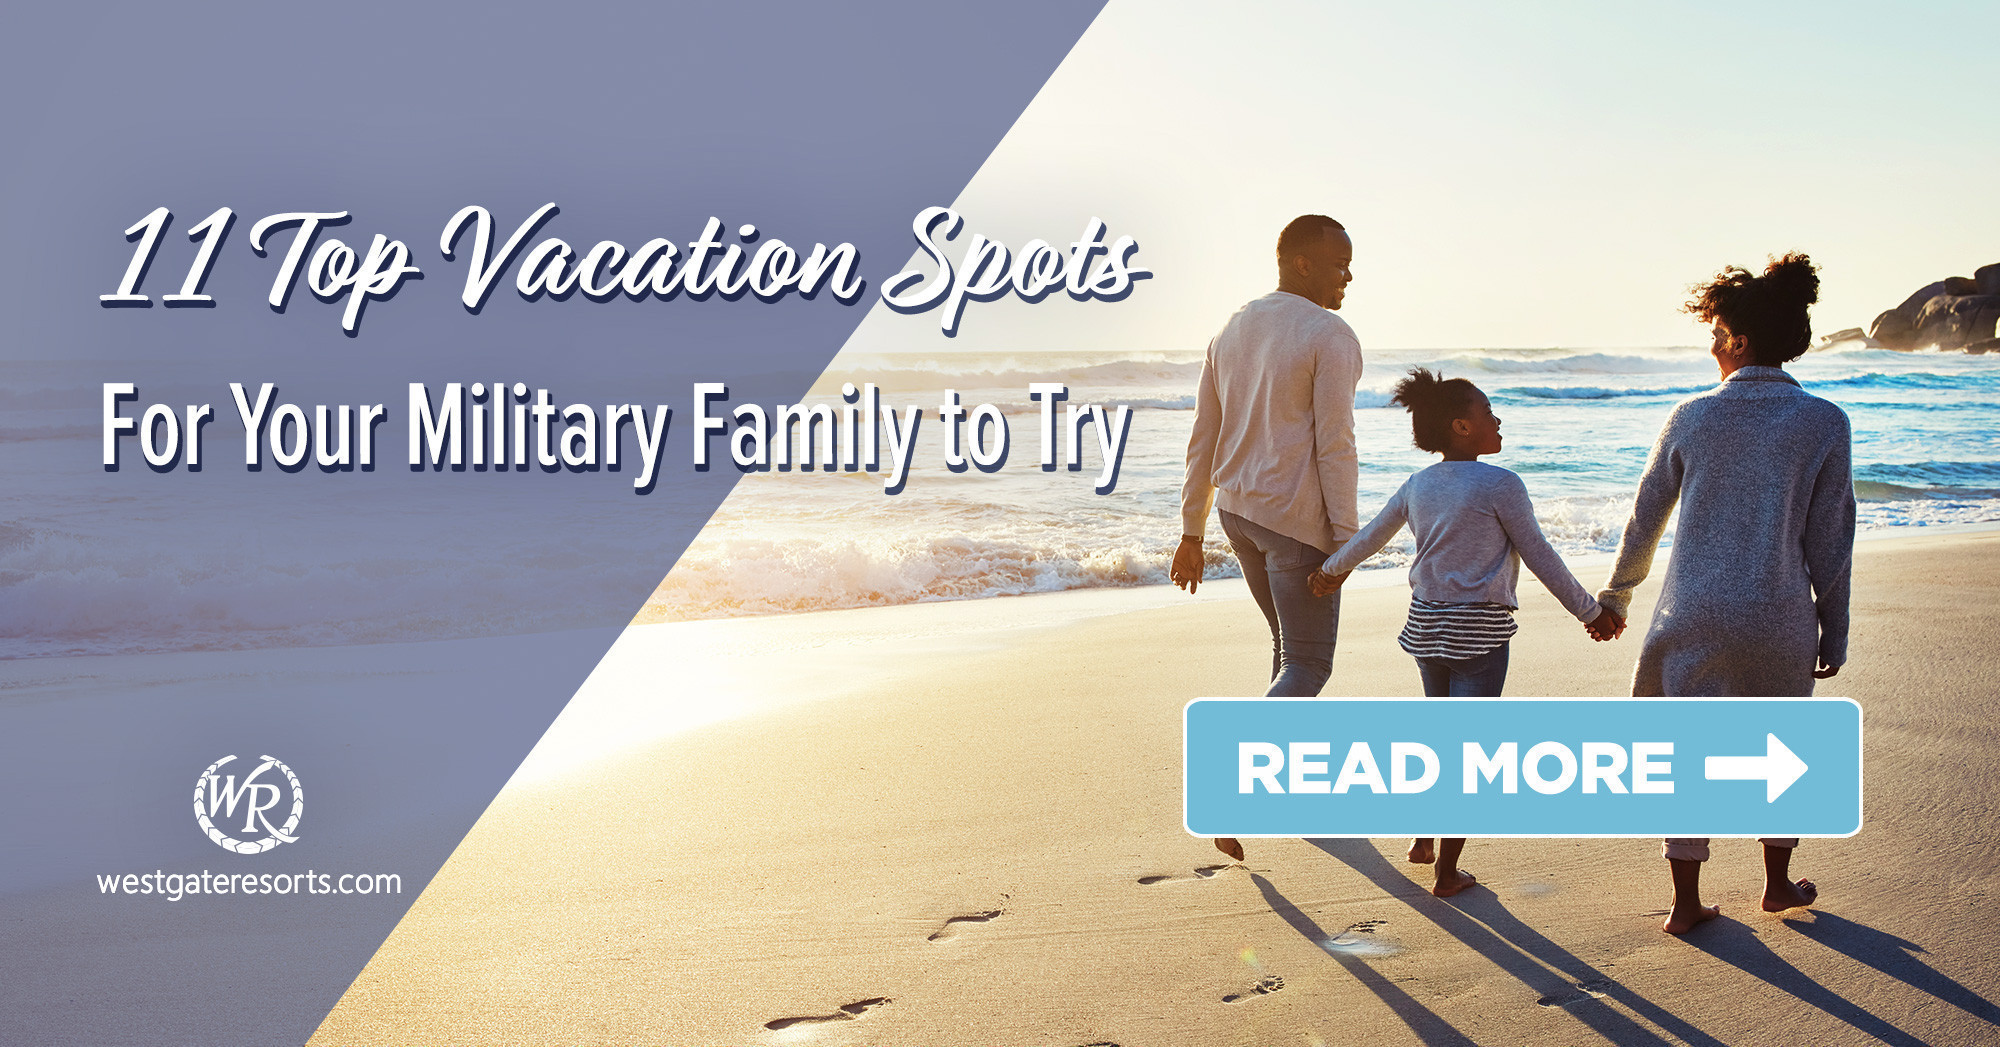 11 Top Vacation Spots For Your Military Family to Try